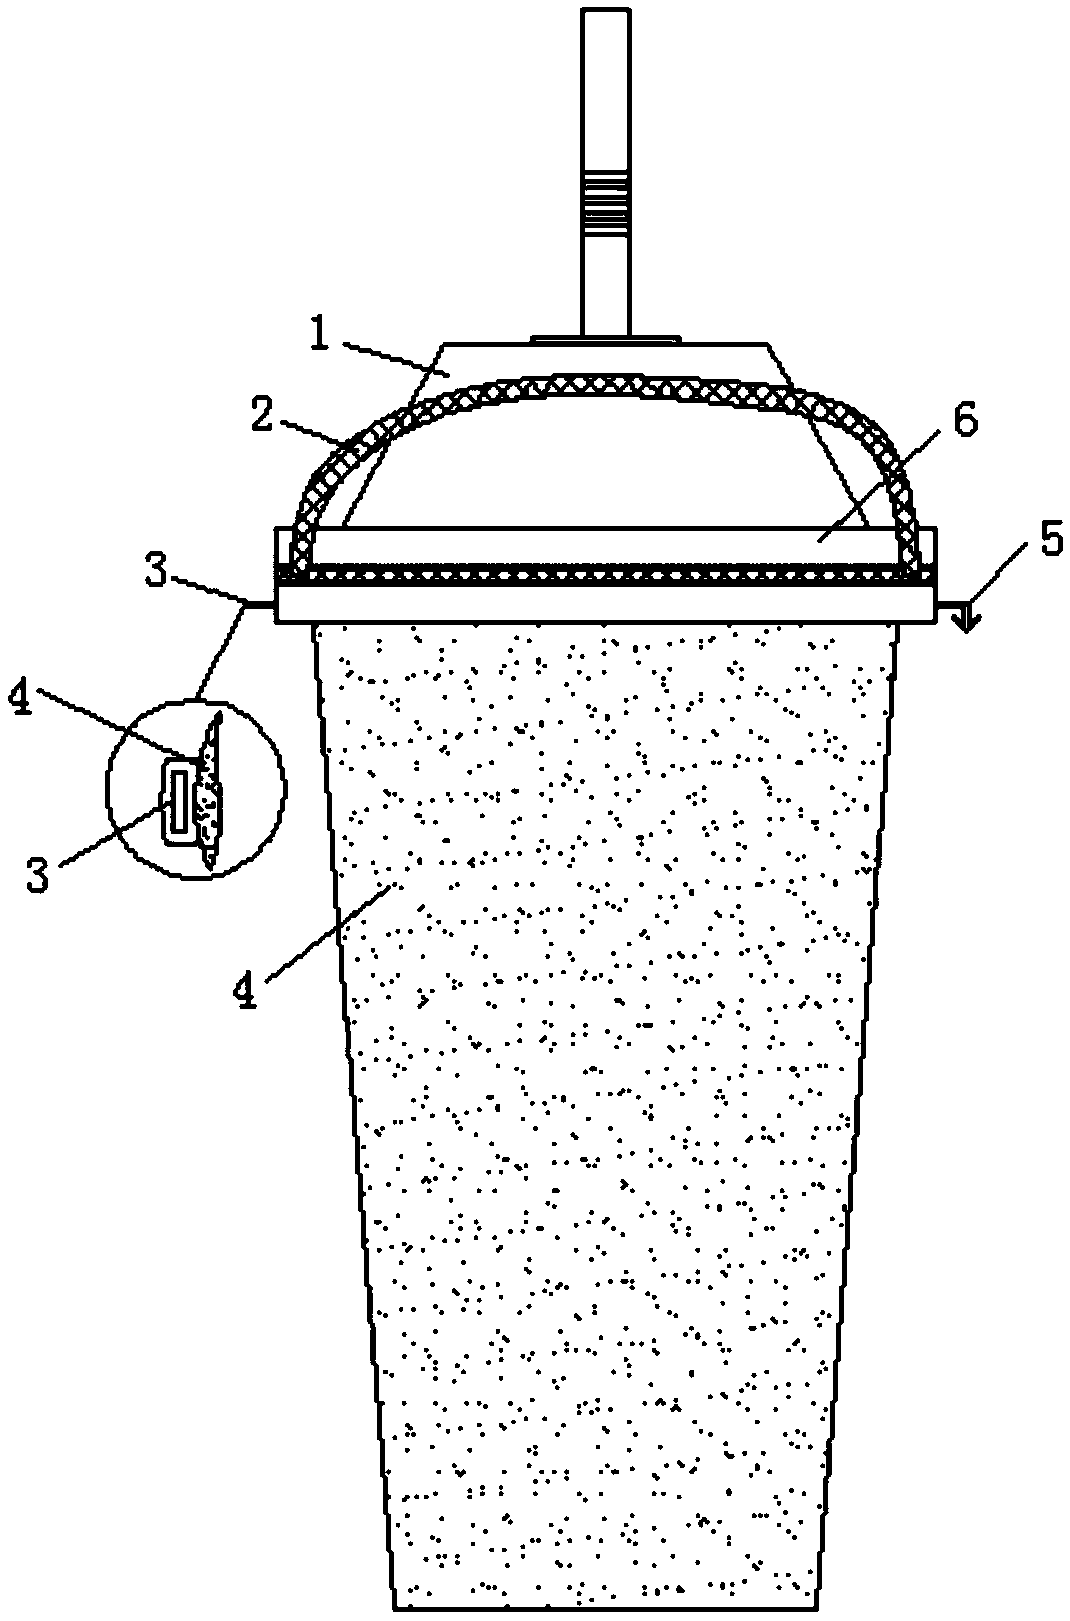 Environment-friendly beverage cup facilitating condiment adding